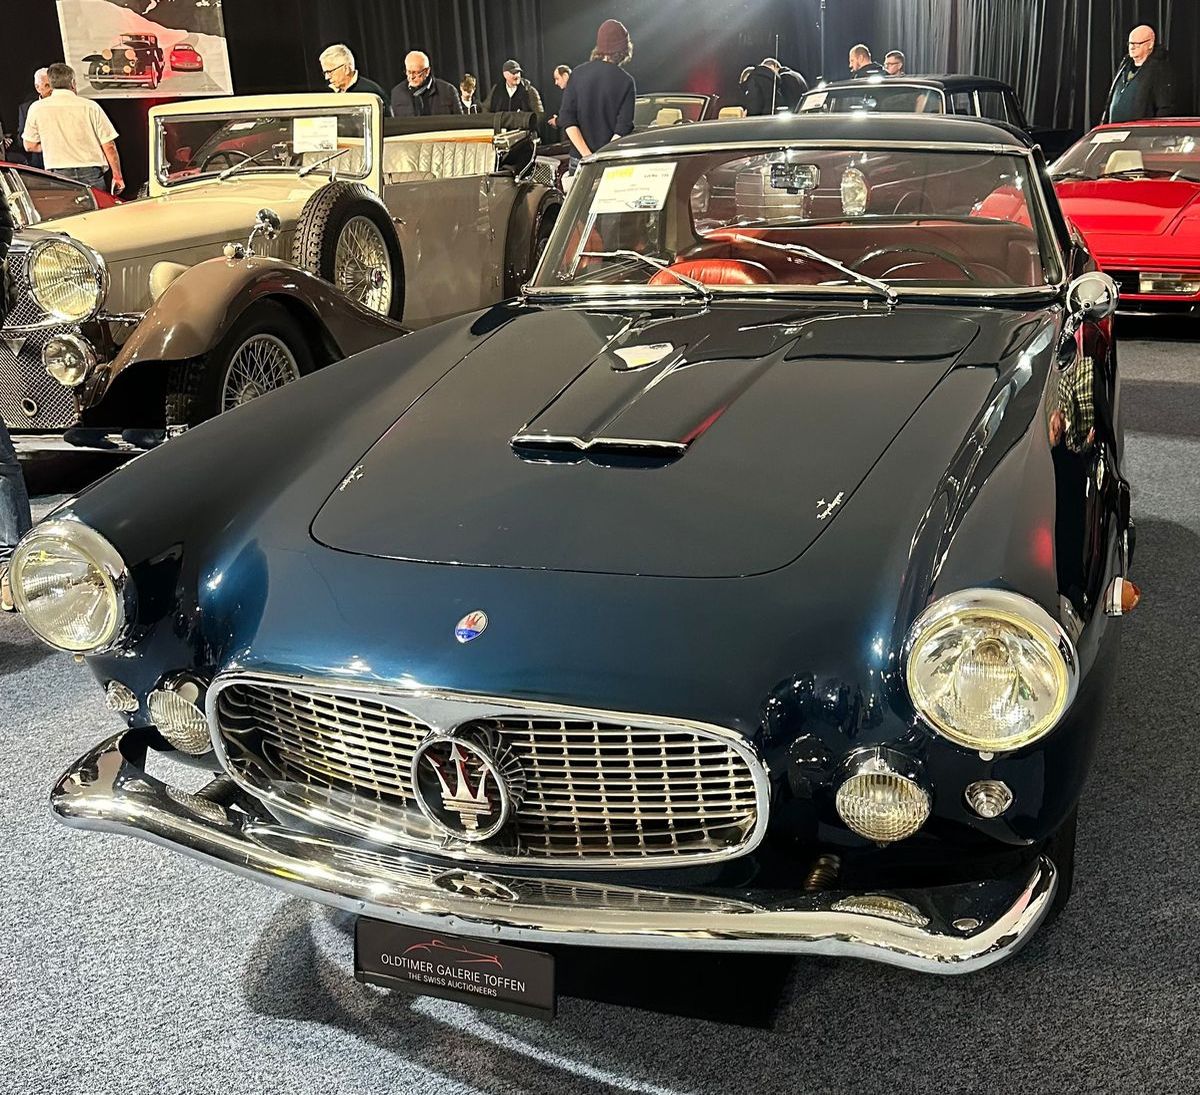 Foto: Classic Car Auction in Gstaad.